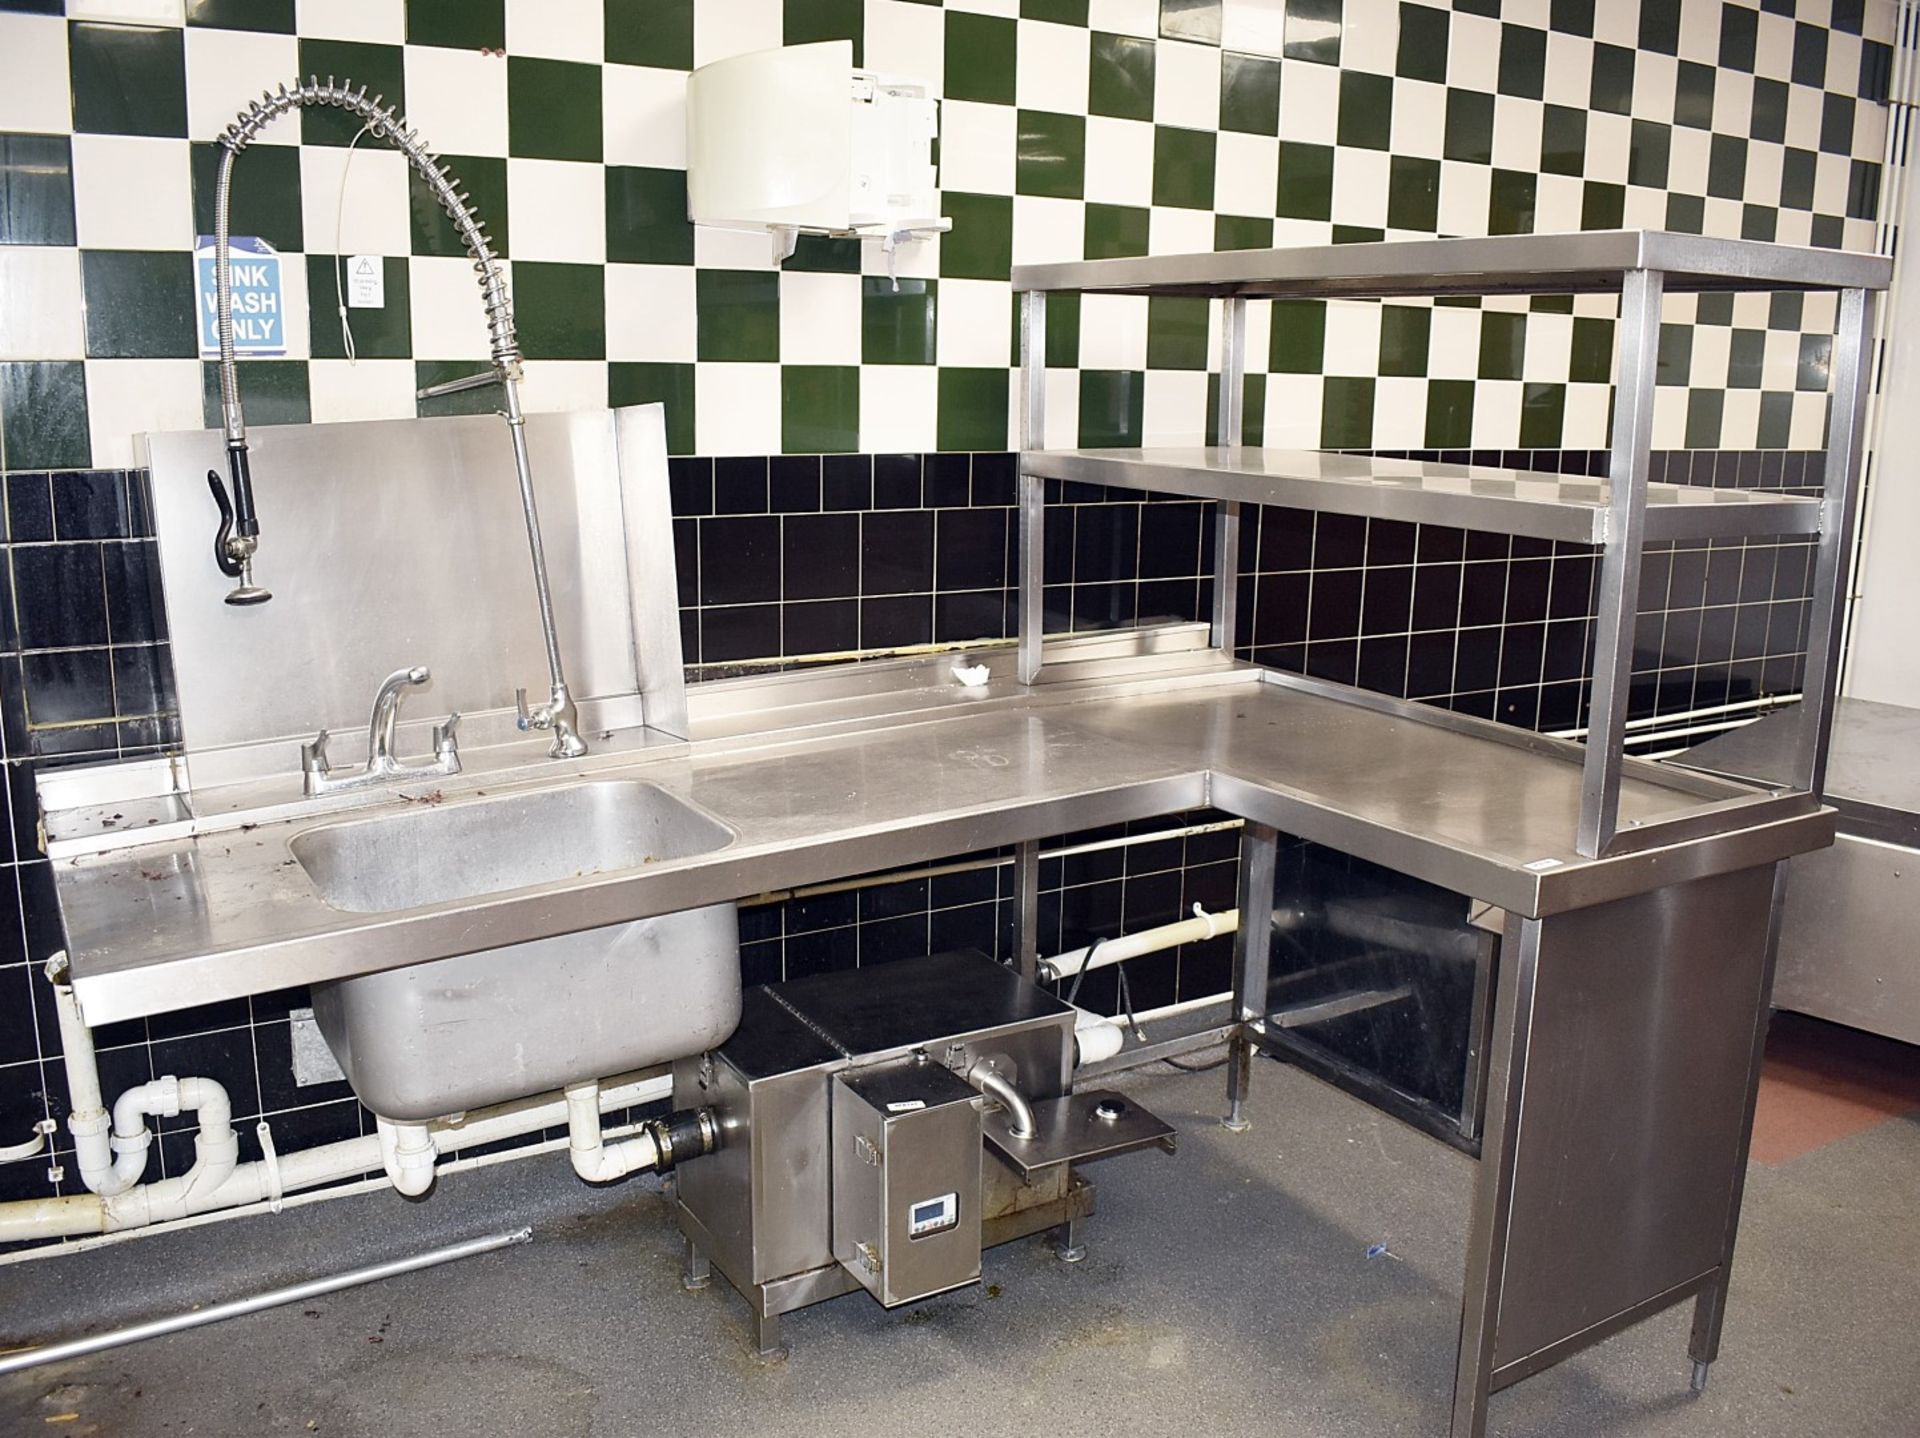 1 x Commercial Stainless Steel Passthrough Inlet and Outlet Tables With Wash Basin and Spray Hose